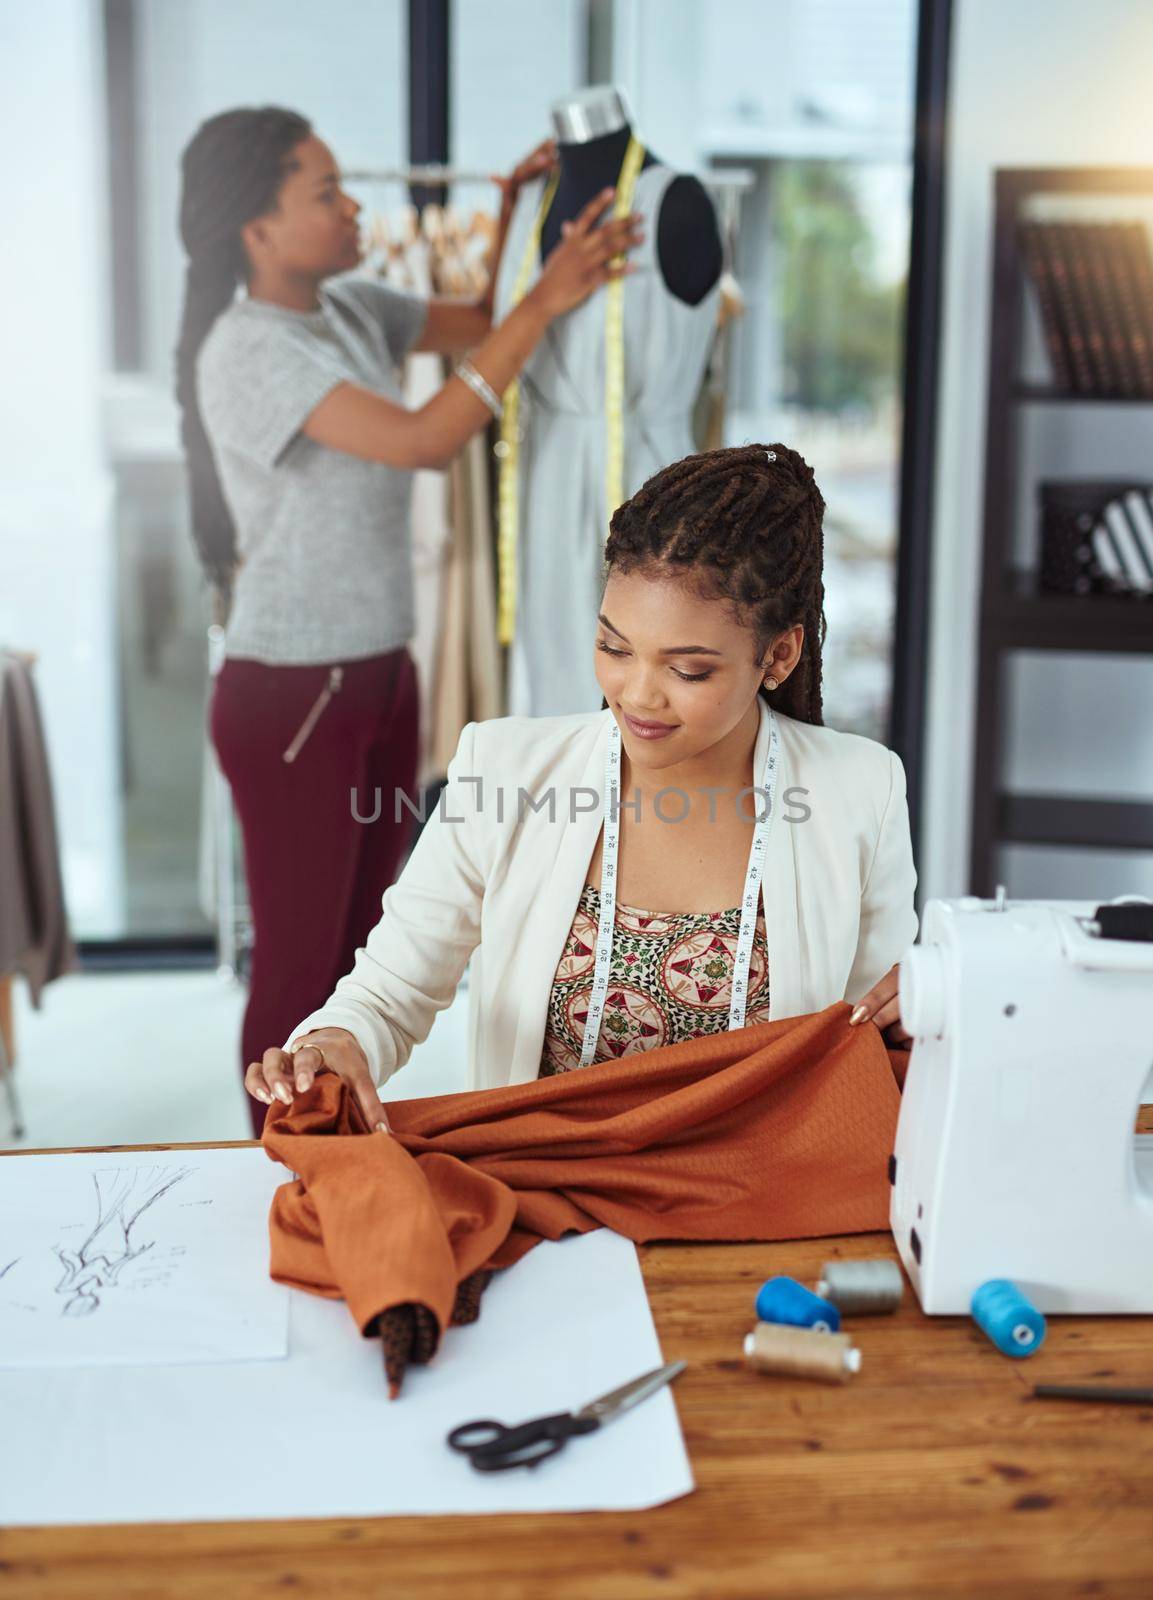 Doing their jobs perfectly. Shot of a young fashion designer sewing garments while a colleague works on a mannequin in the background. by YuriArcurs